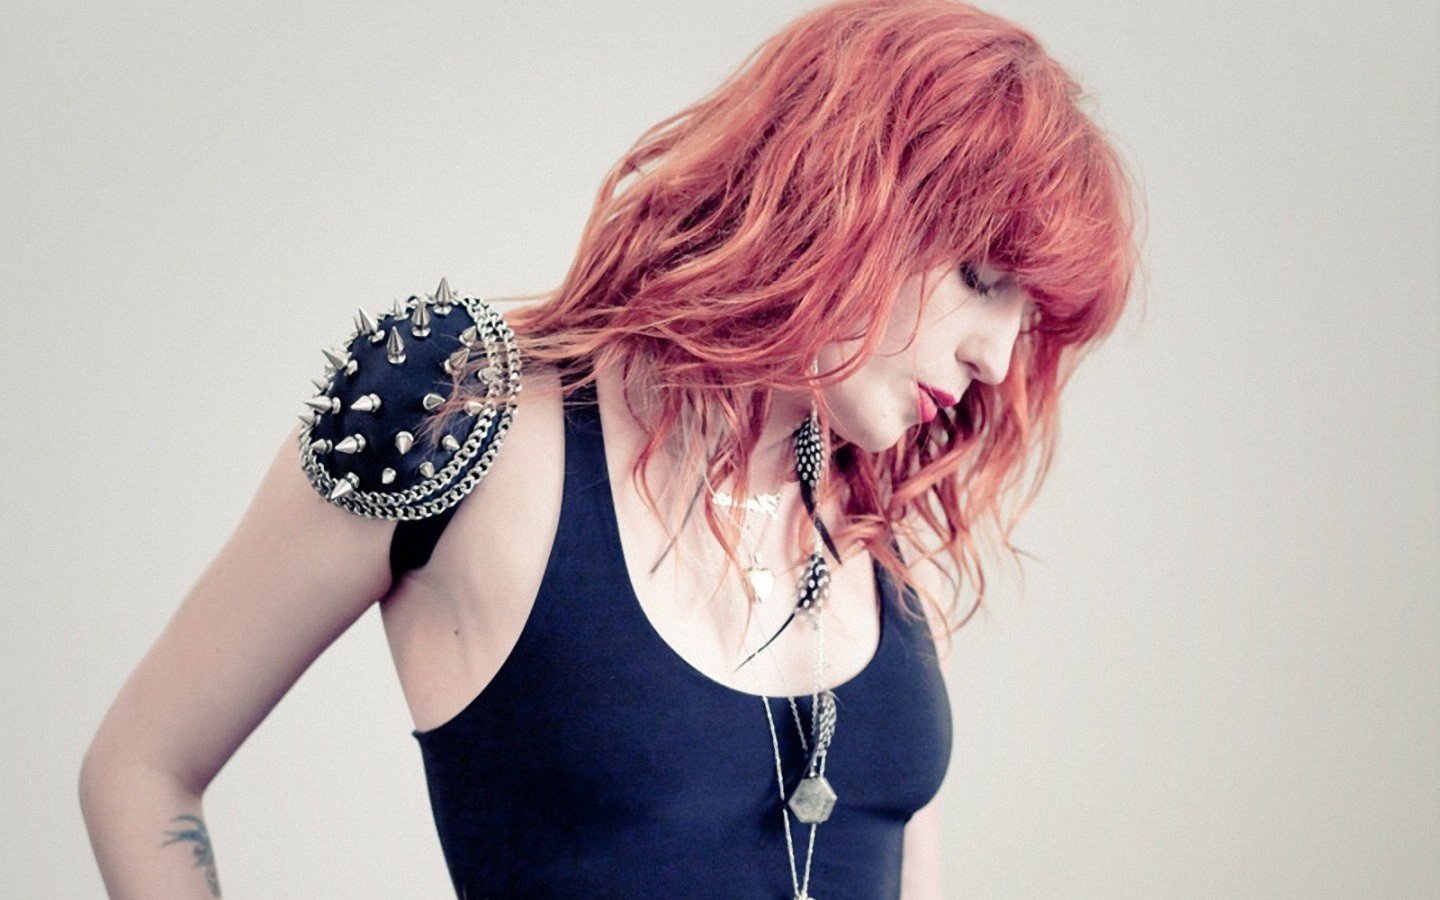 tattoos, Women, Redheads, Spikes, Singers, Necklaces, Shoulders, Florence, Welch, White, Background Wallpaper